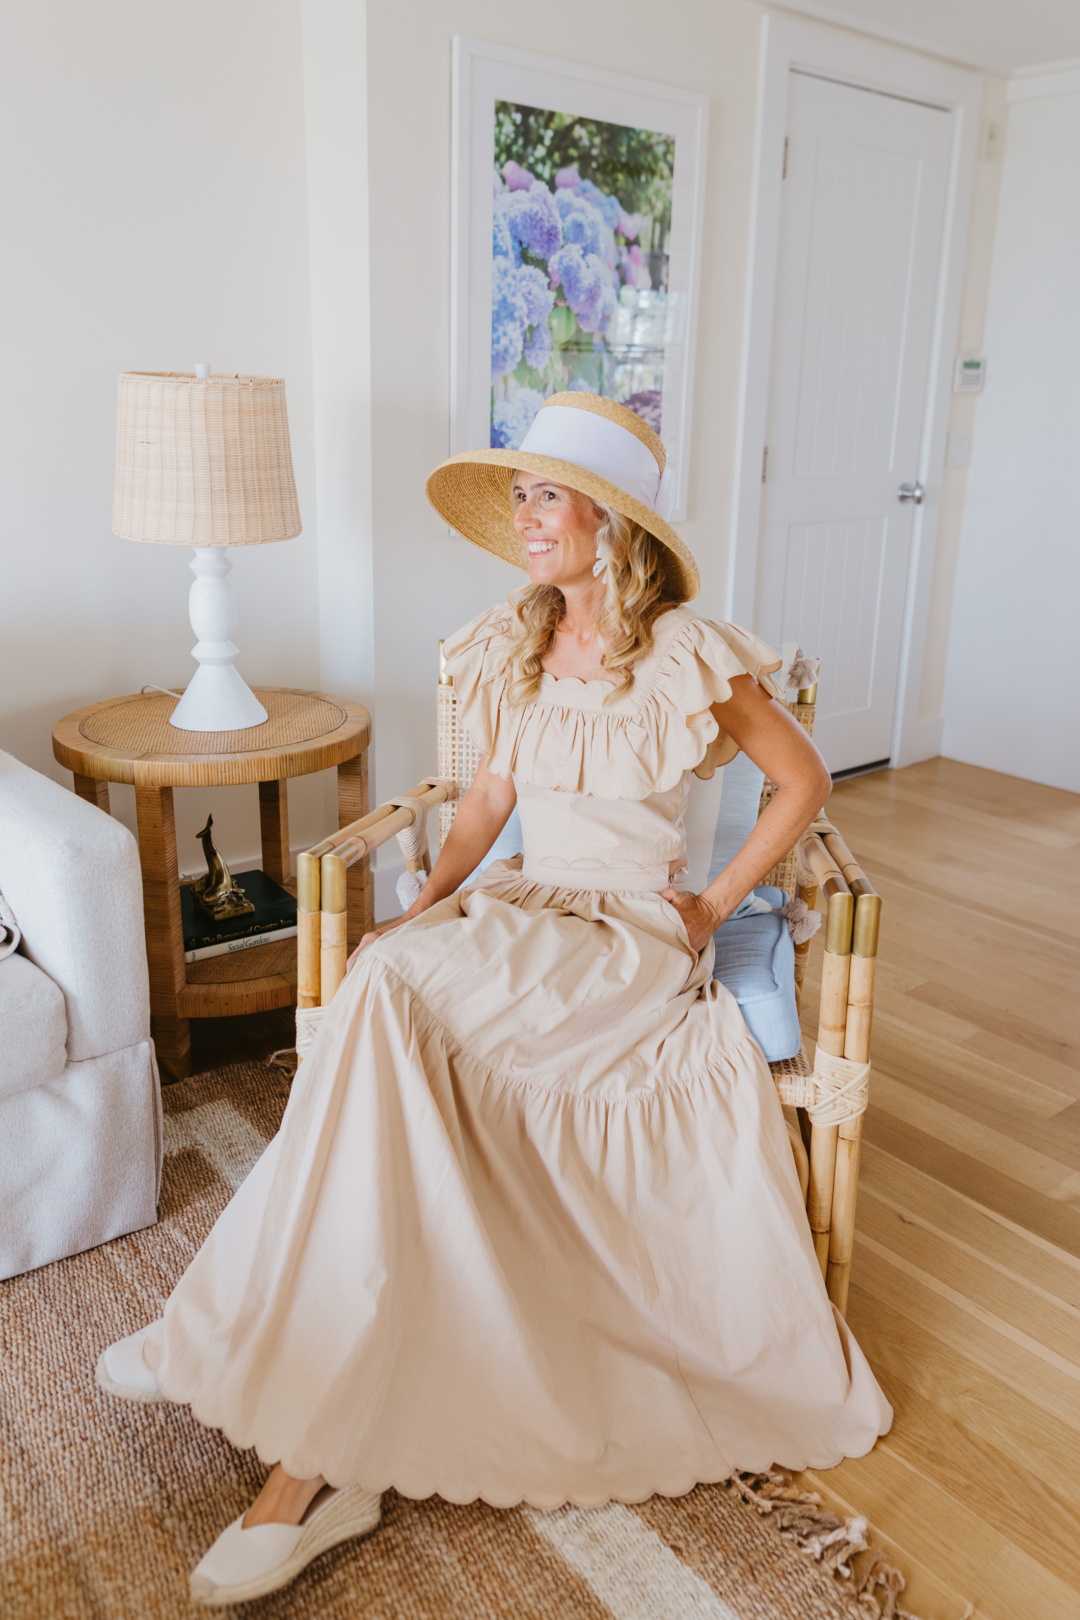 Travel: Designing the Endeavor Cottage with Serena & Lily at Inspirato's Harborview Nantucket